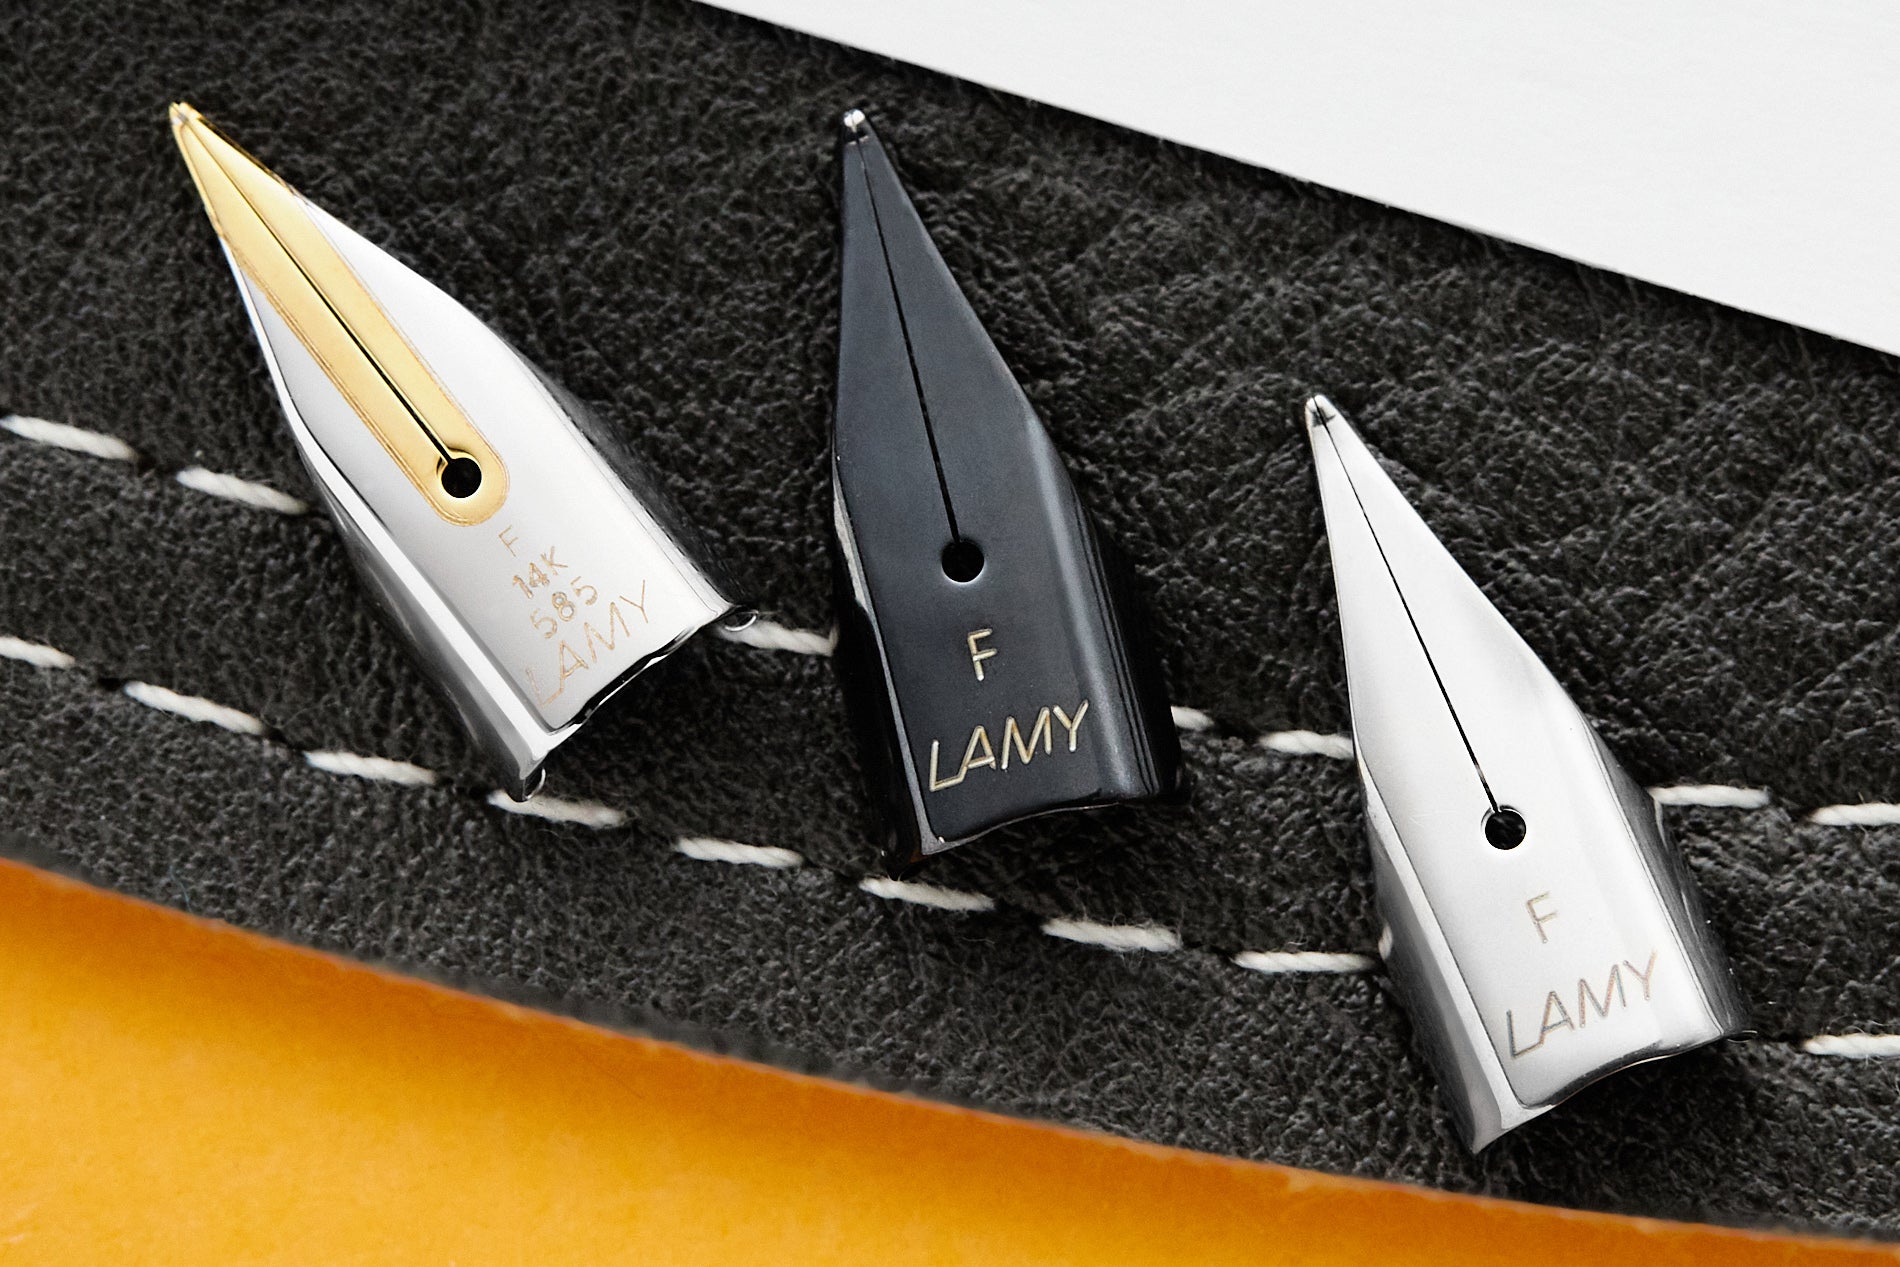 LAMY fountain pen replacement nibs